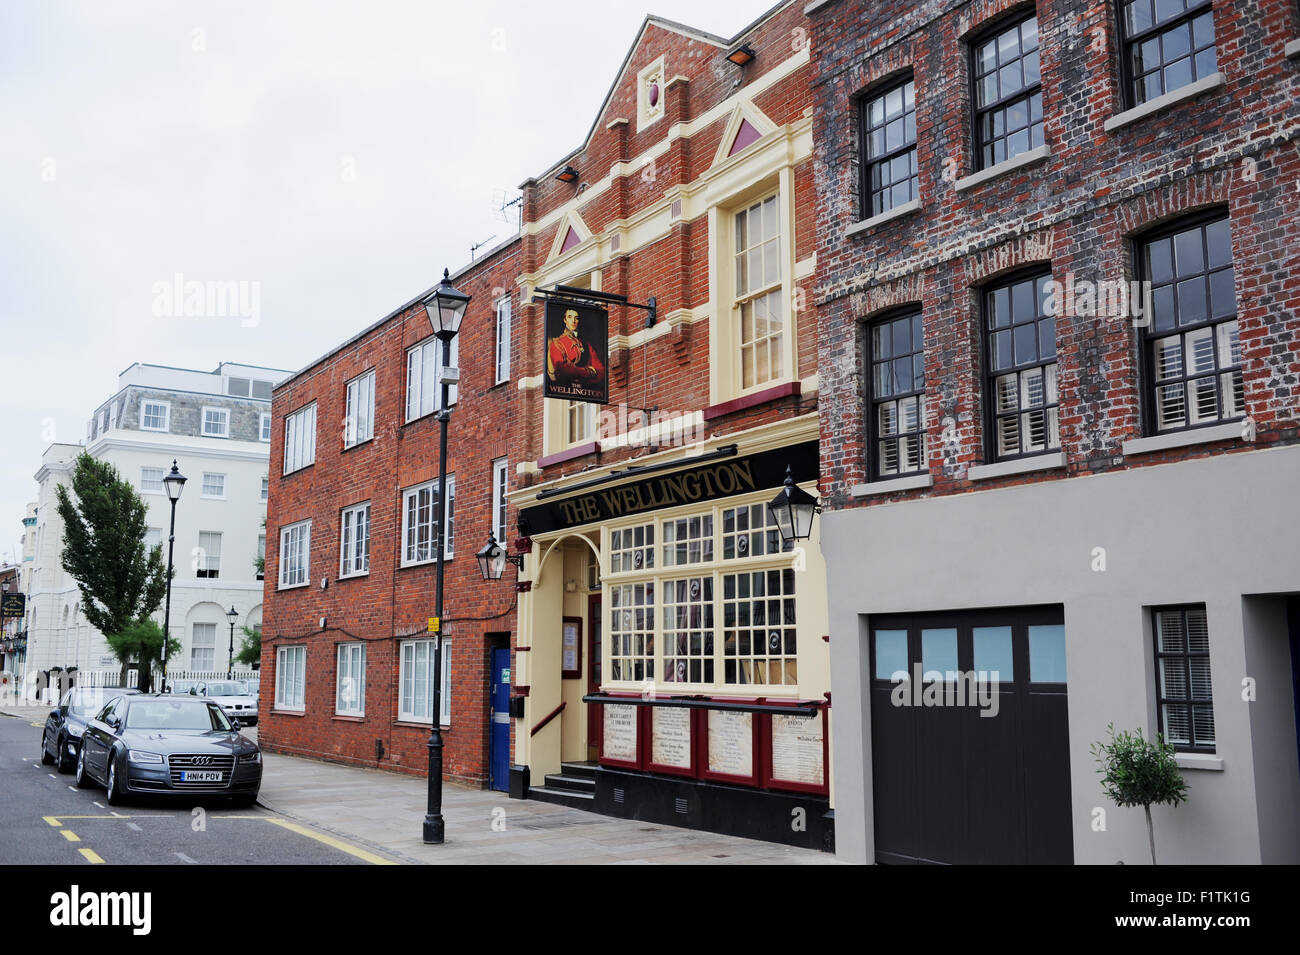 The Wellington pub in the old town Portsmouth Hampshire UK Stock Photo